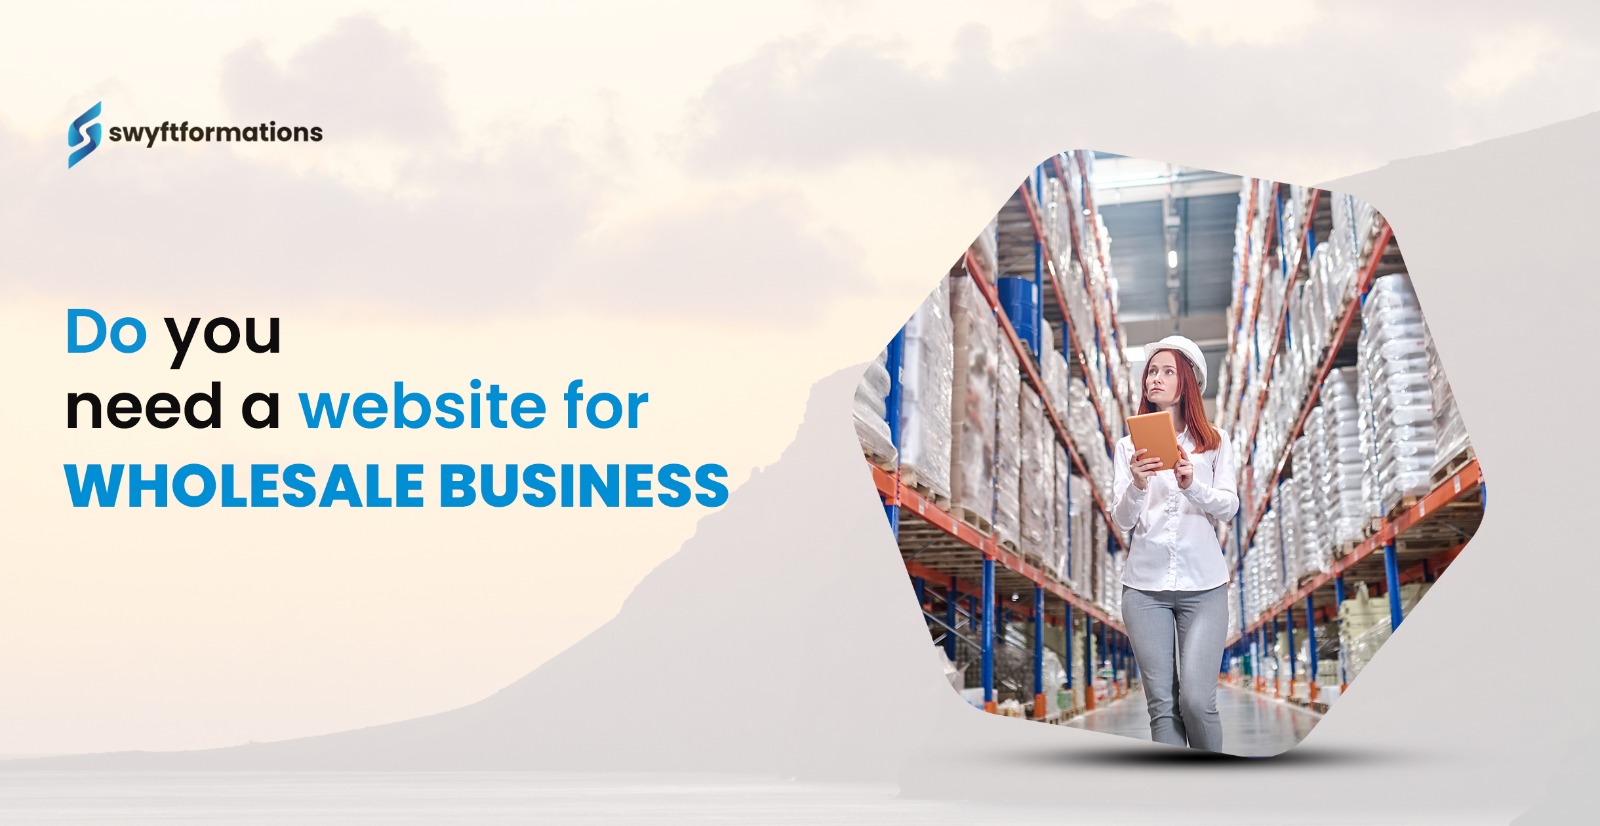 Do you need a website for wholesale business?